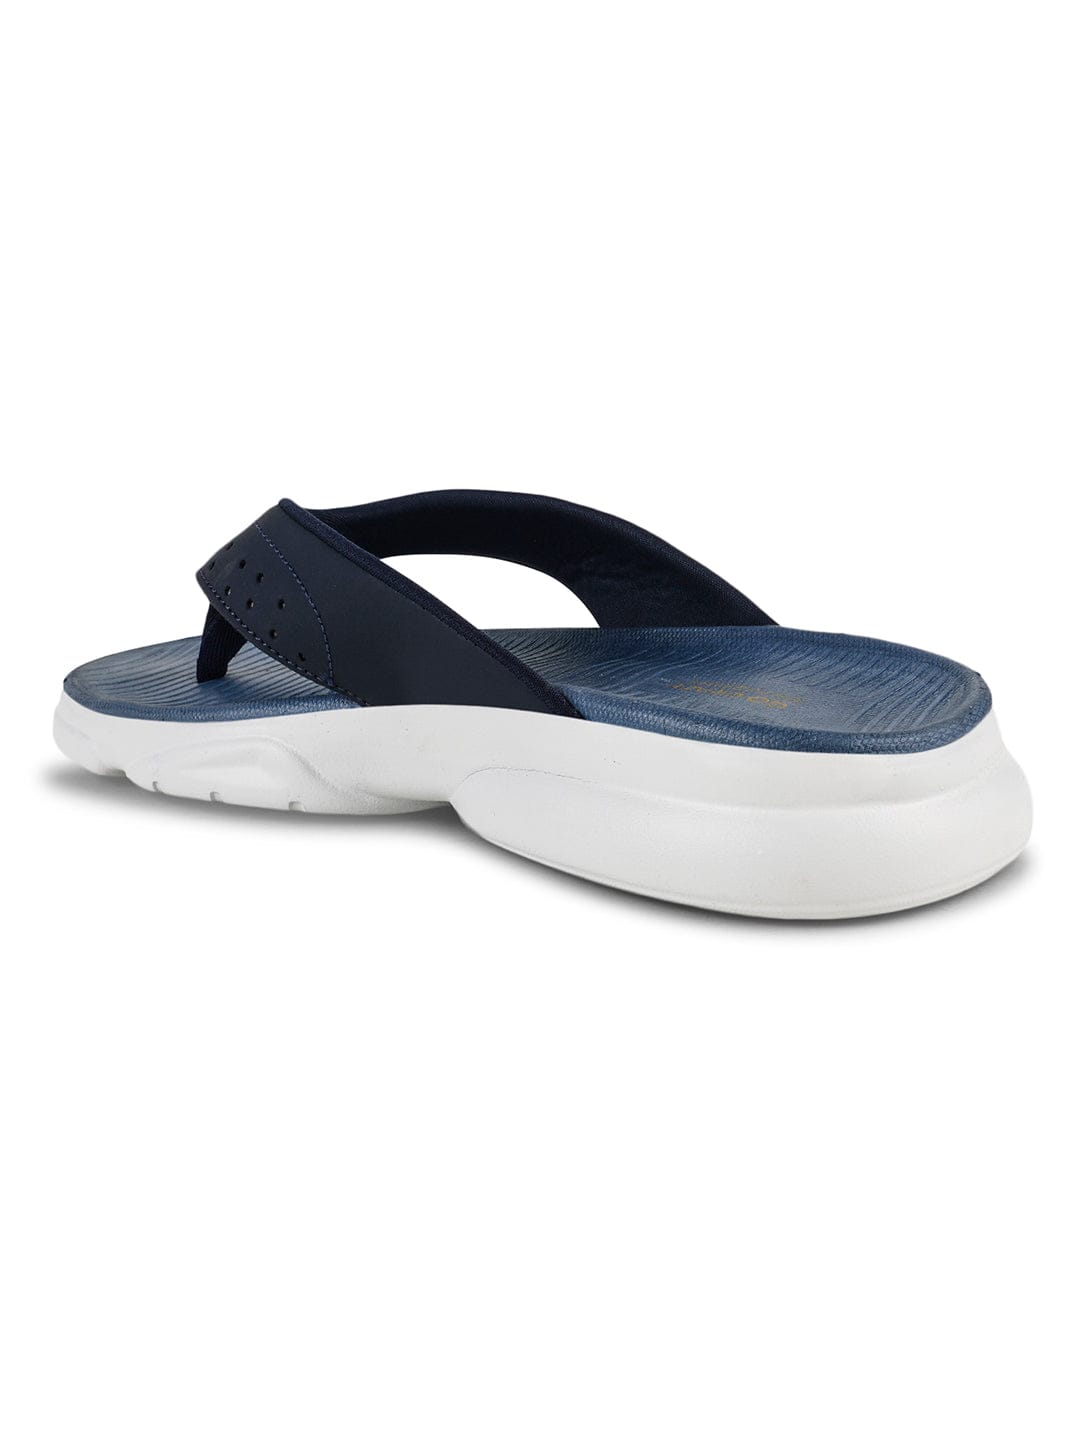 Buy Sliders For Men: Sl-405A-R-Slt-Nvy-L-Gry | Campus Shoes